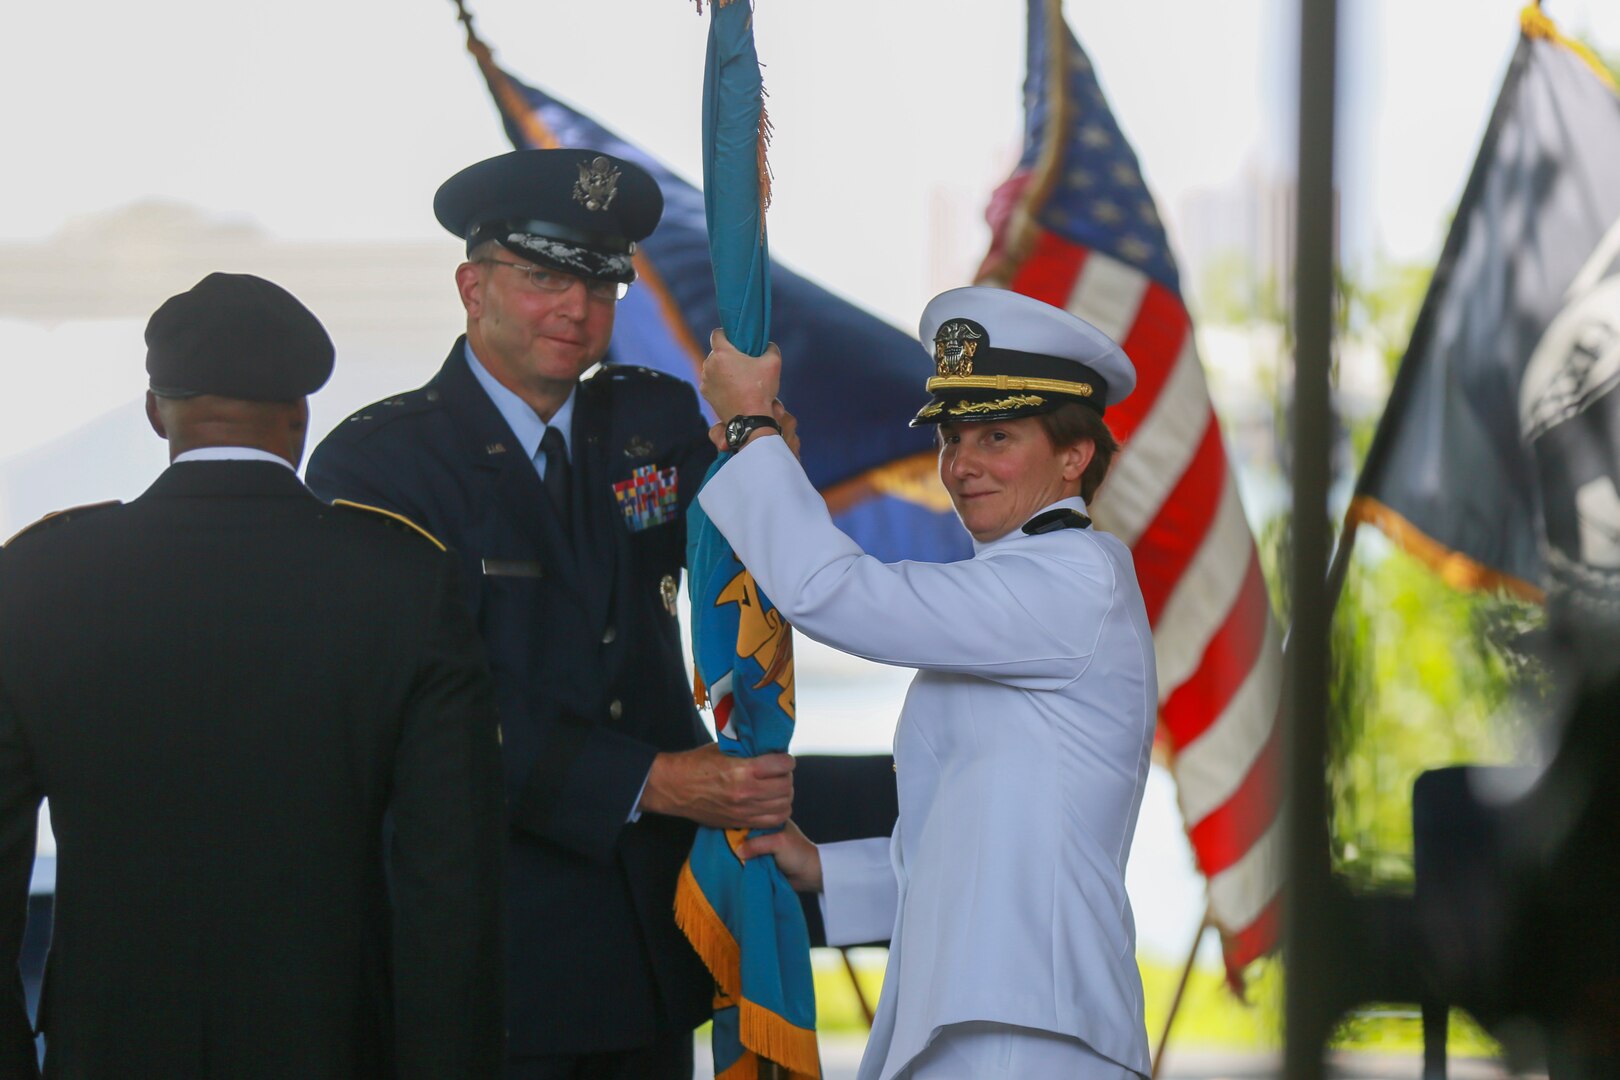 DLA Logistics Operations Director Air Force Maj. Gen. Mark Johnson passes the DLA flag to incoming DLA Pacific Commander Navy Capt. Kristin Acquavella, during a change of command at Nob Hill on historic Ford Island, Pearl Harbor, Hawaii July 10.(Photo by Marine Cpl. Patrick Mahoney)